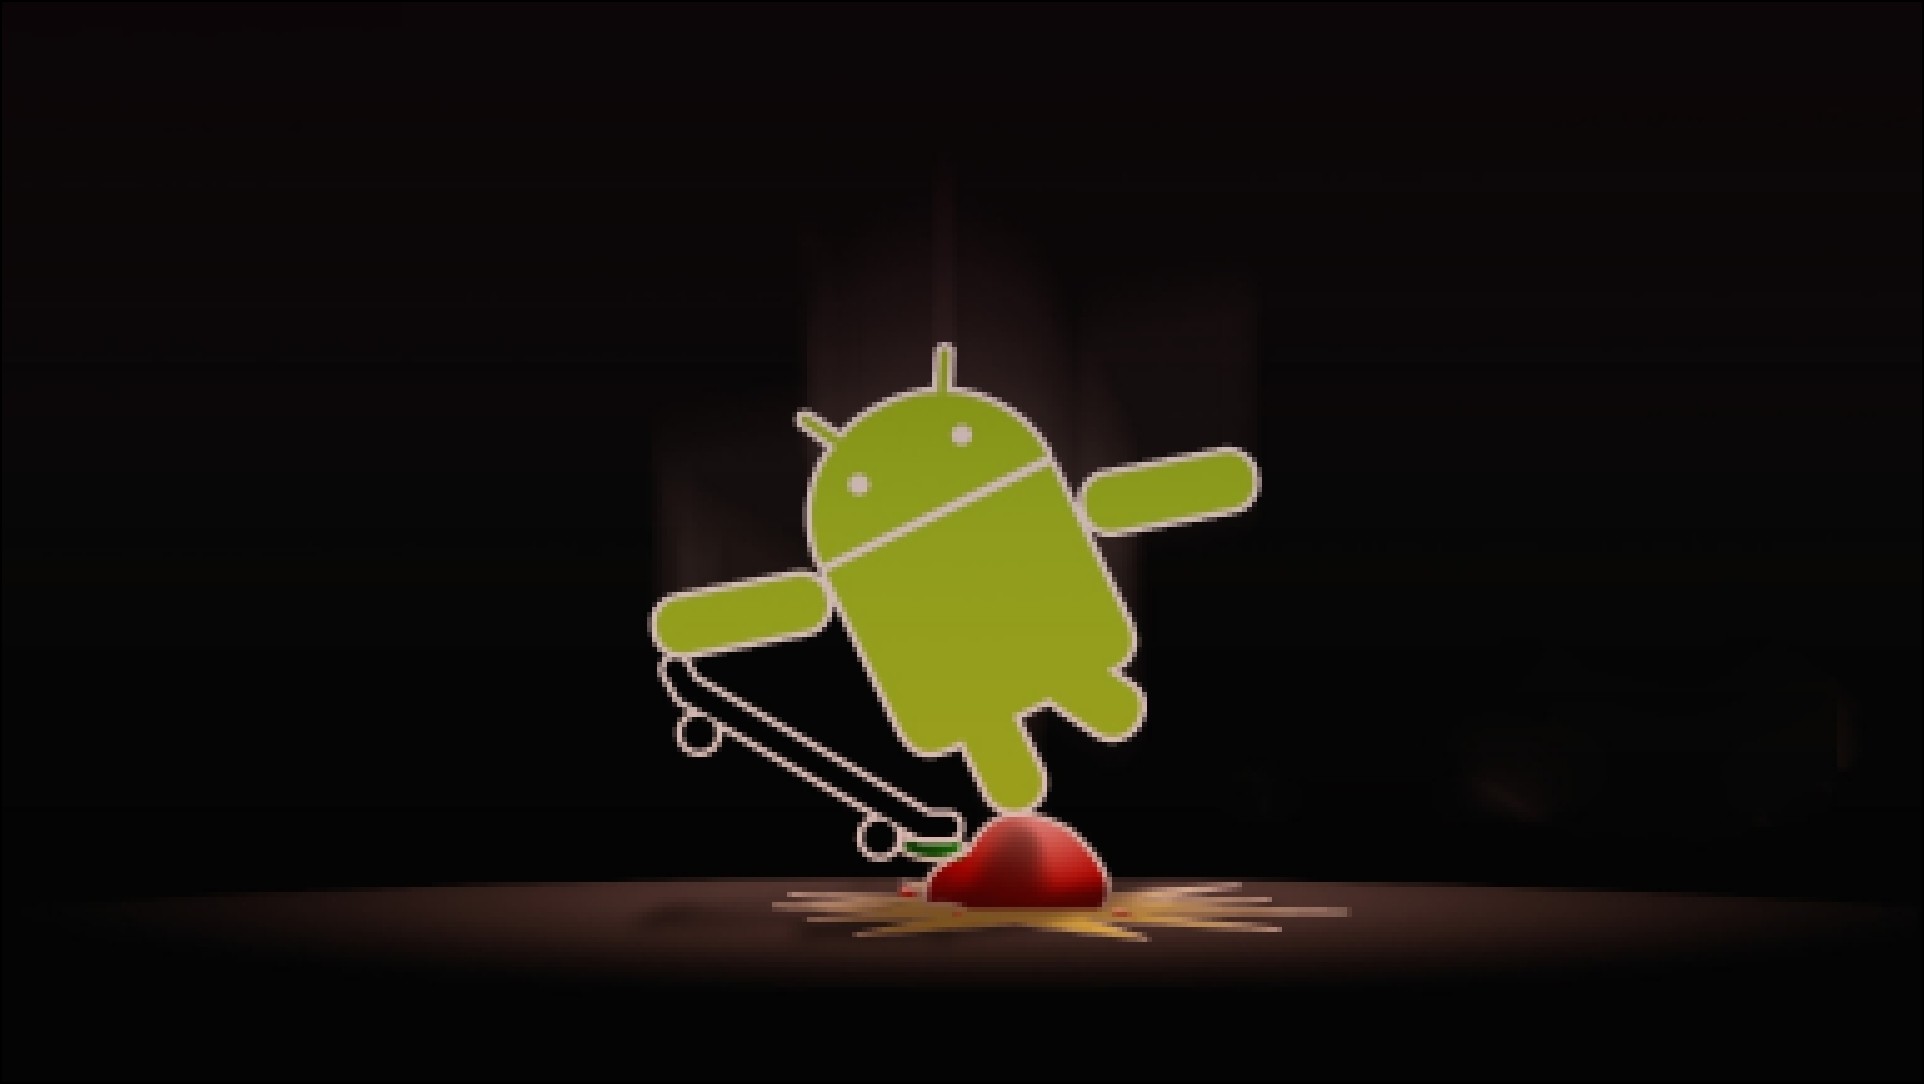 1924x1084 Apple Vs Android Wallpaper Latest Cool #y5rzq2a1.